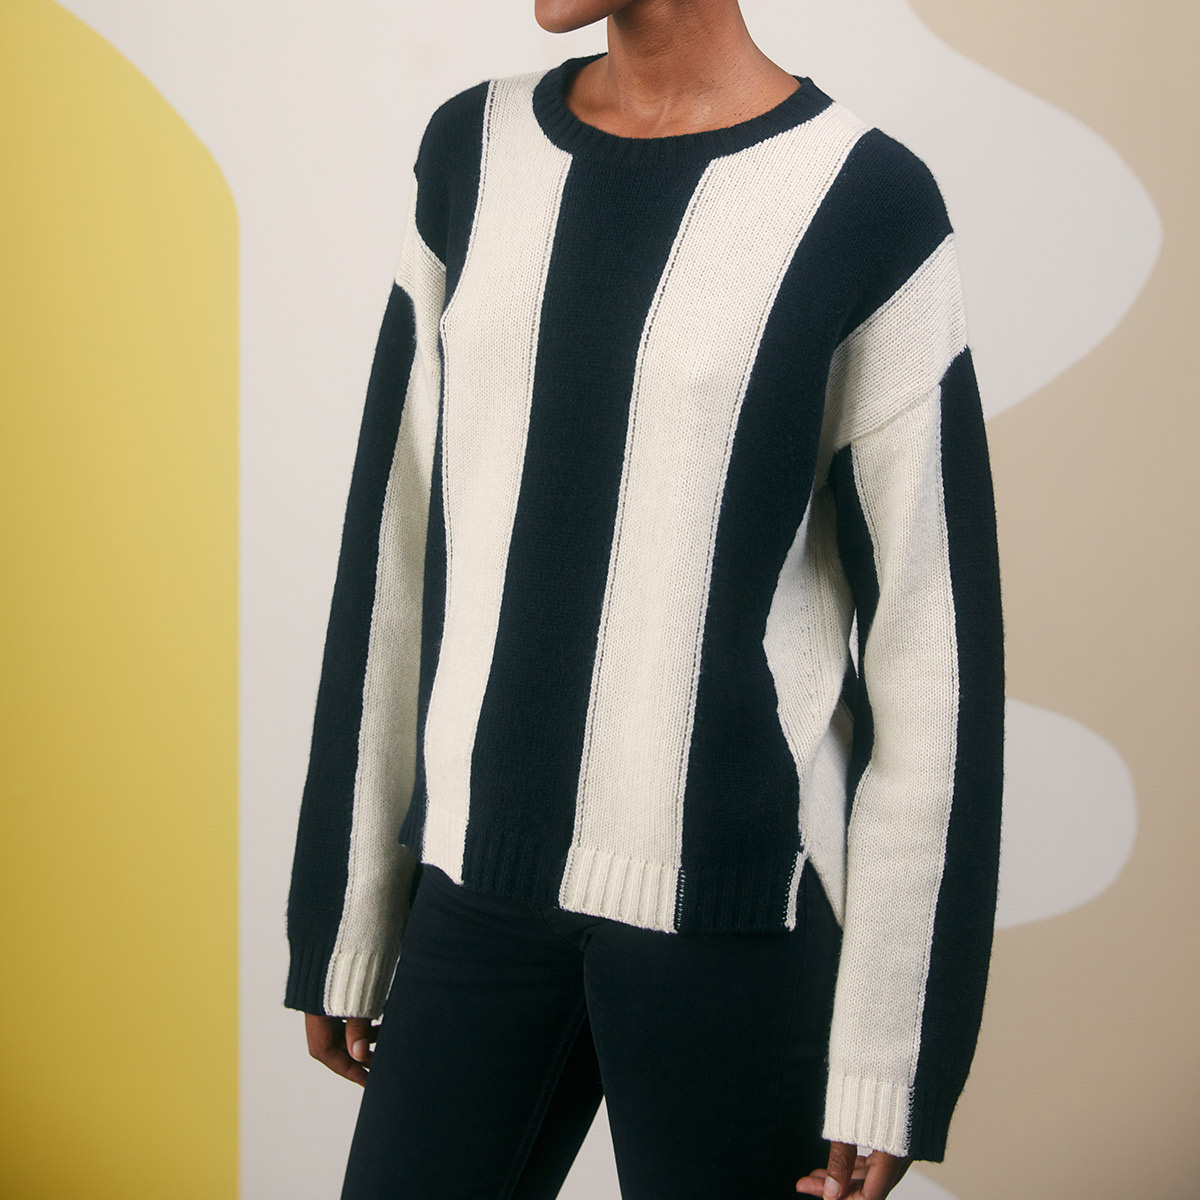 Concorde jumper, Black / White striped - Round neck - Wool and Cashmere - image 1